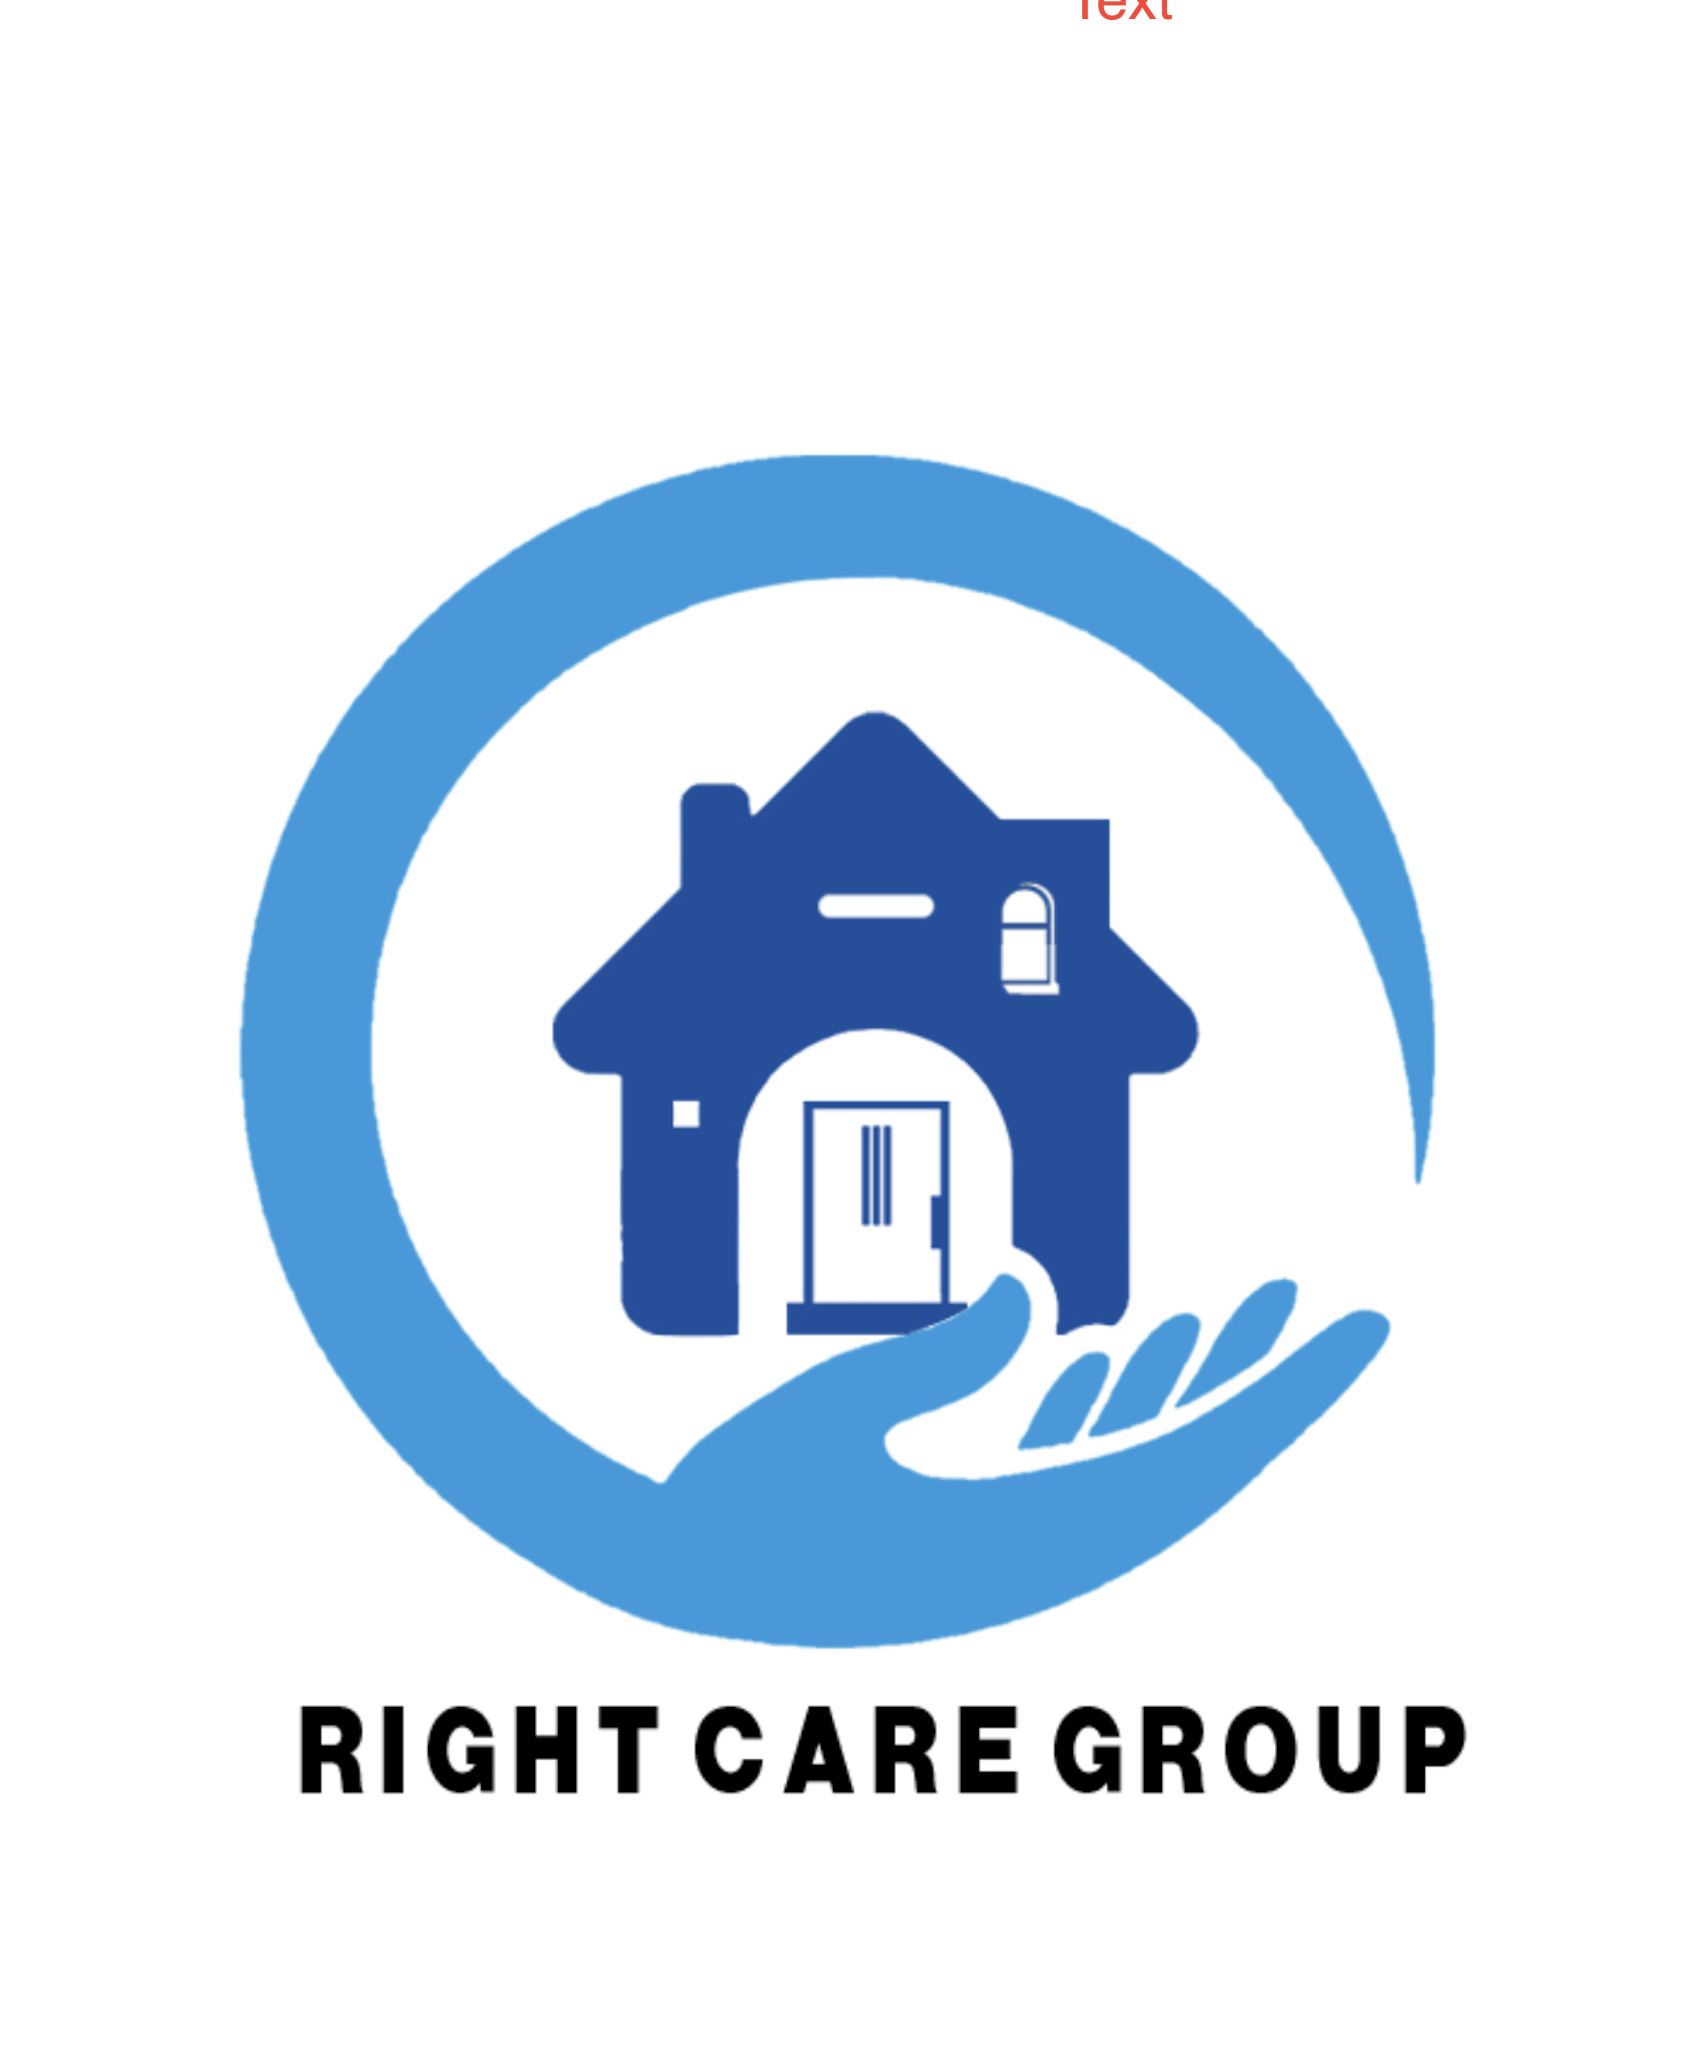 Logo of Right Care Group